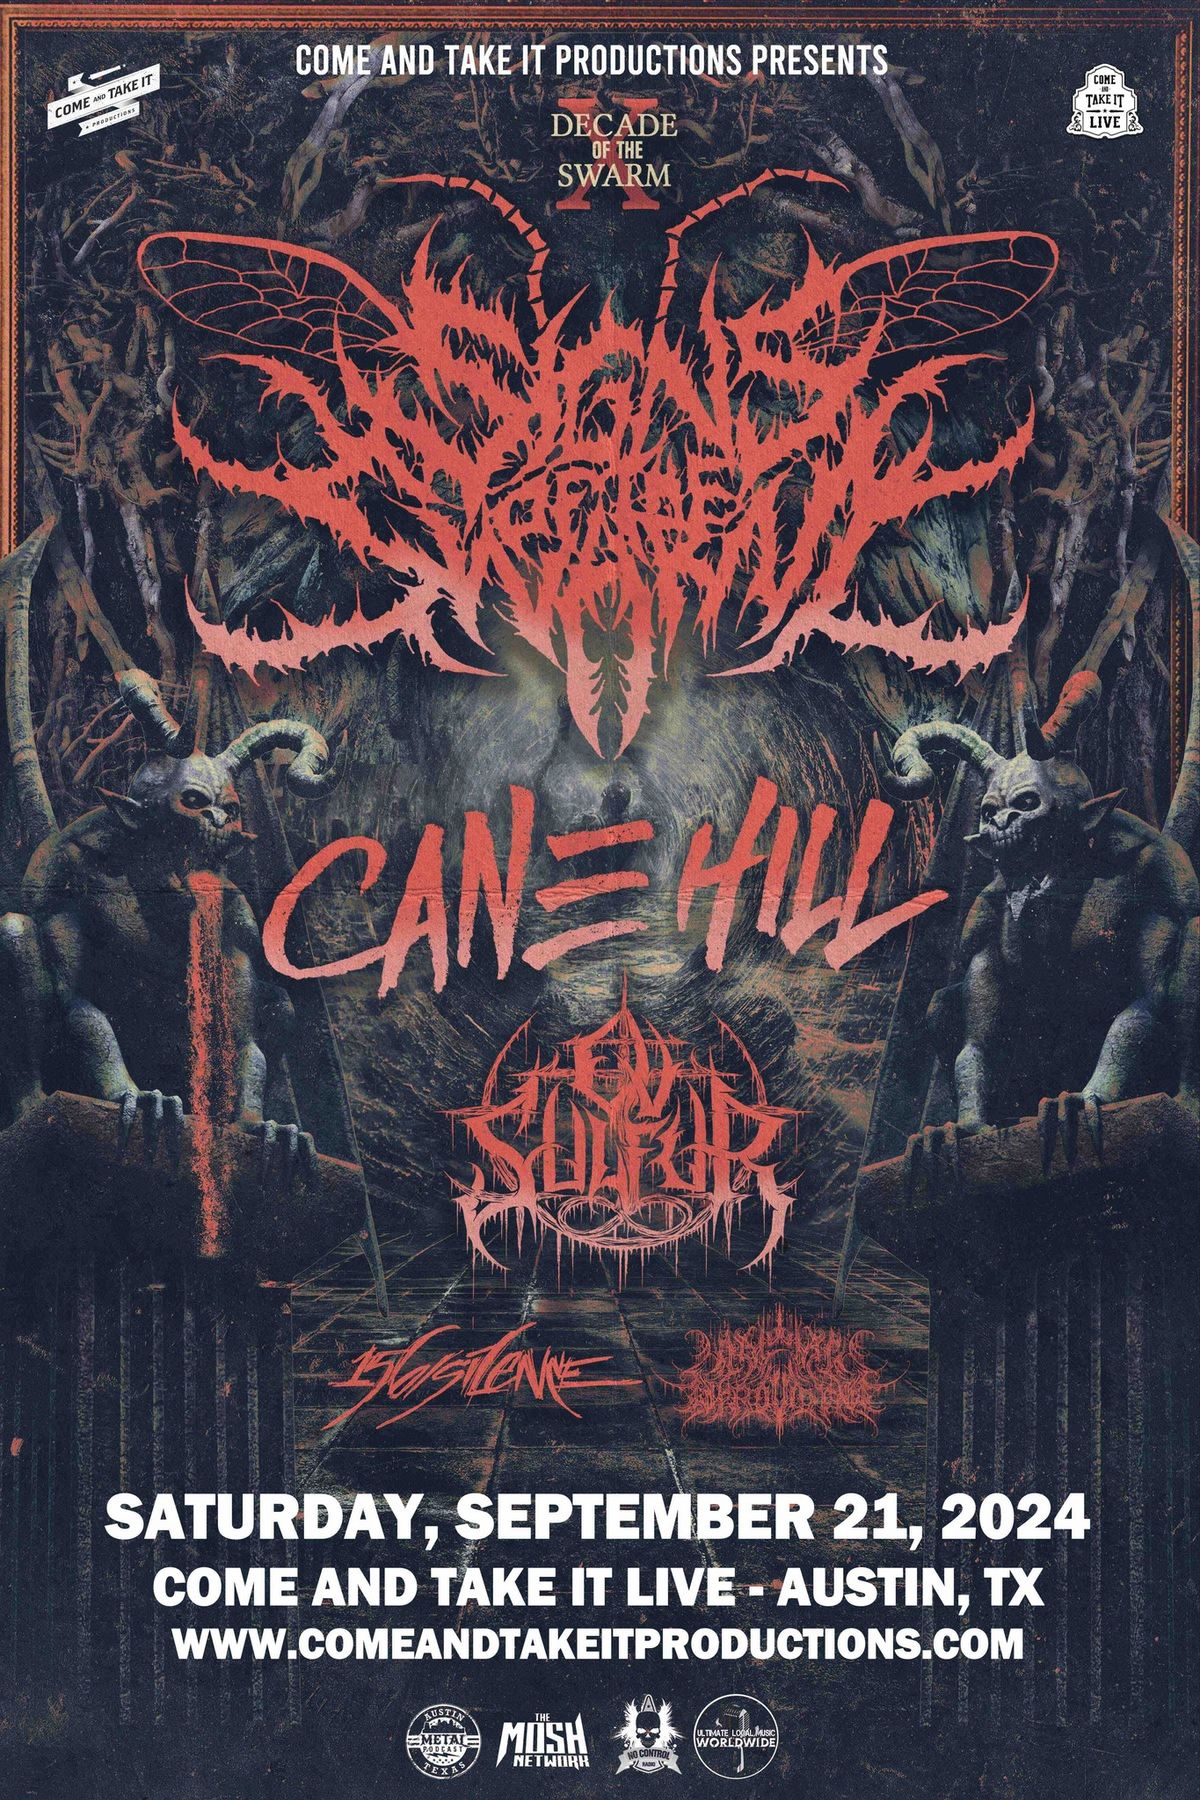 Signs of The Swarm, Cane Hill, Ov Sulfer and MORE at Come and Take It Live!